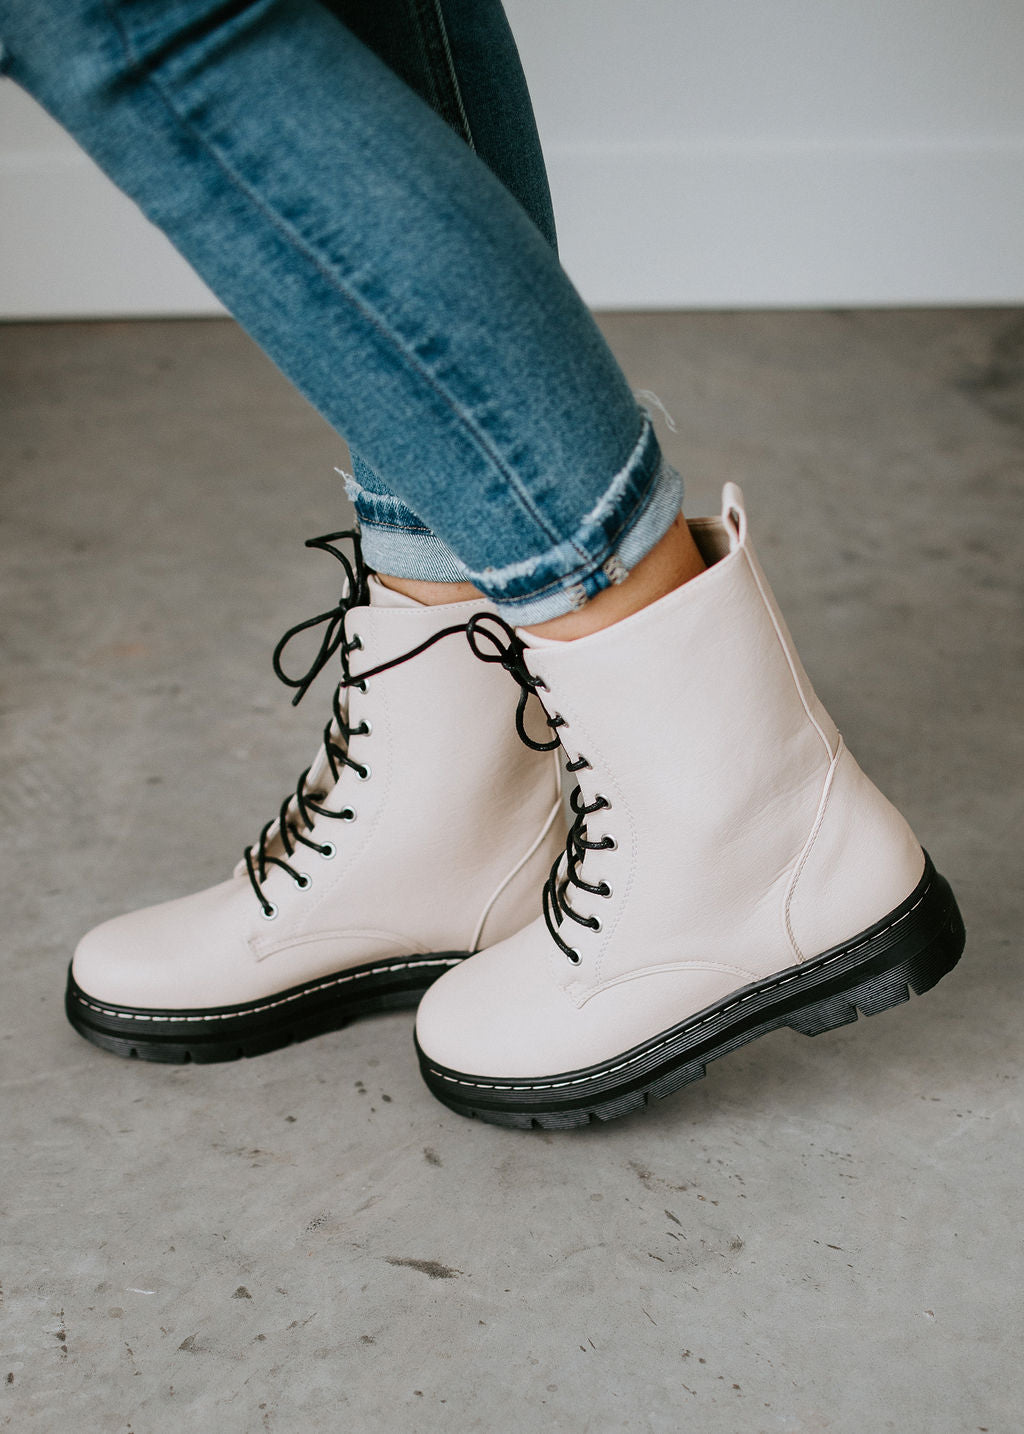 The Outcast Combat Boot